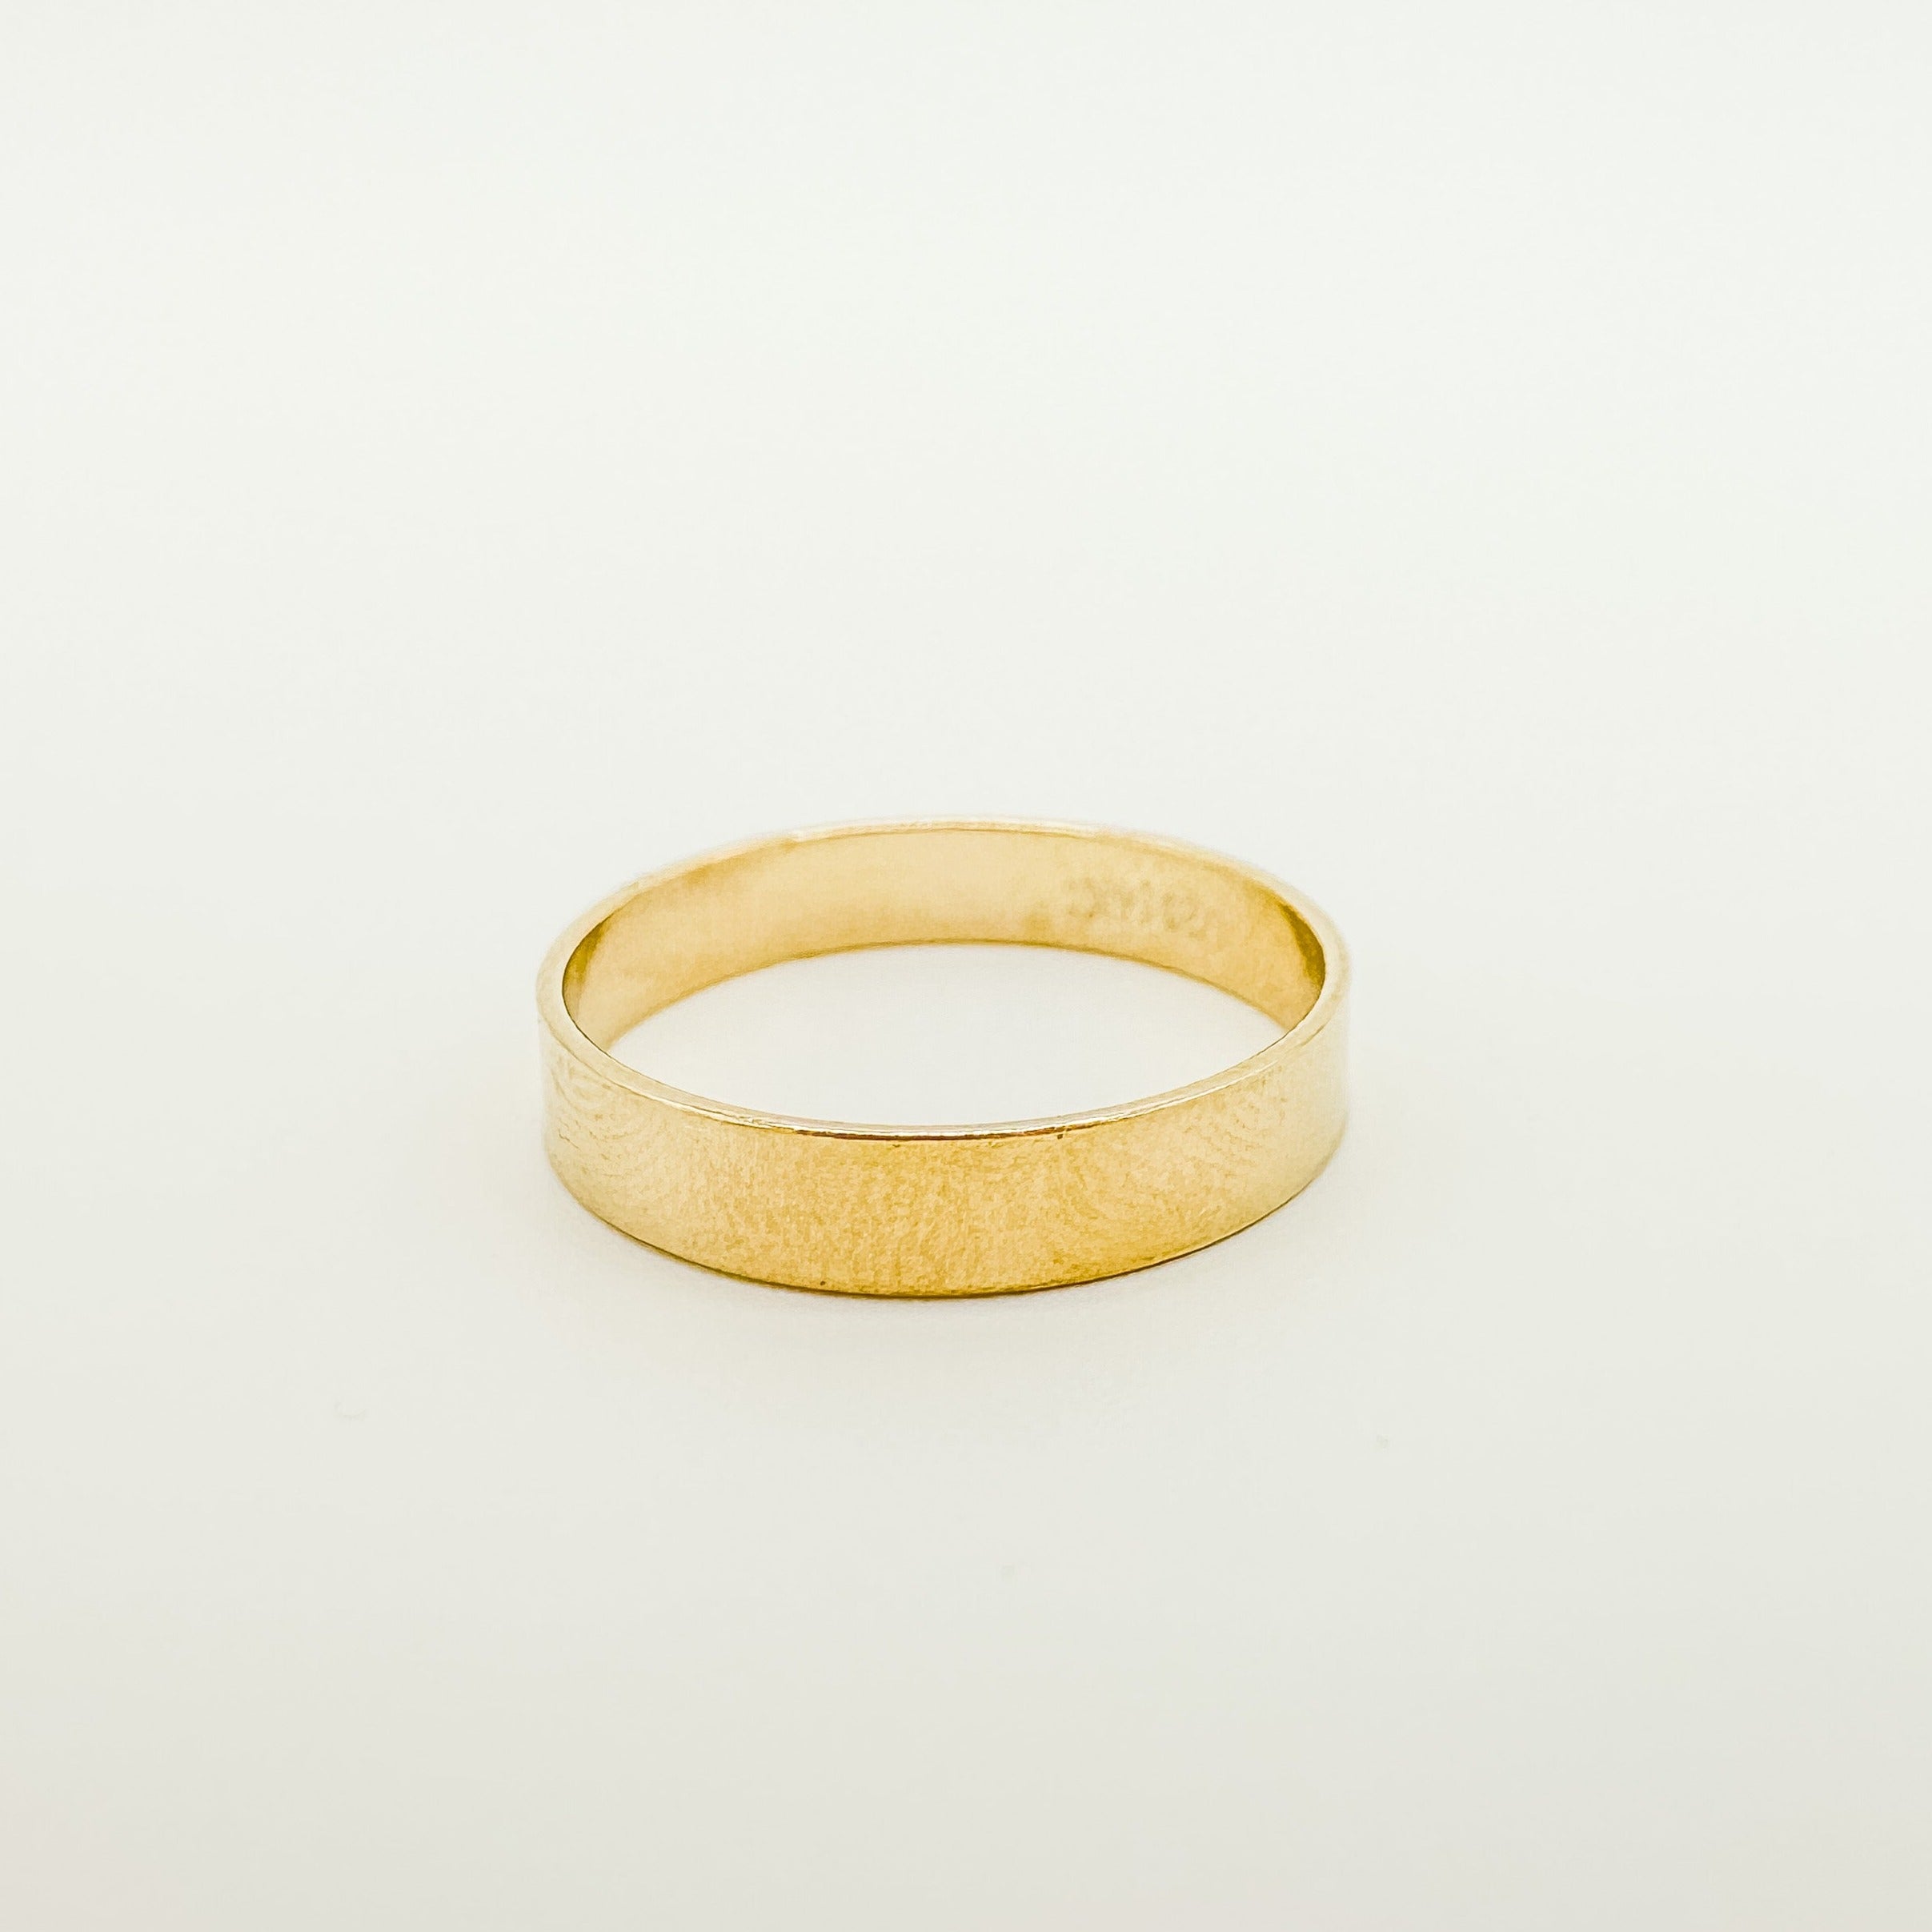 gold filled ring / stacking ring / gold filled stacking ring / permanent jewelry supplier